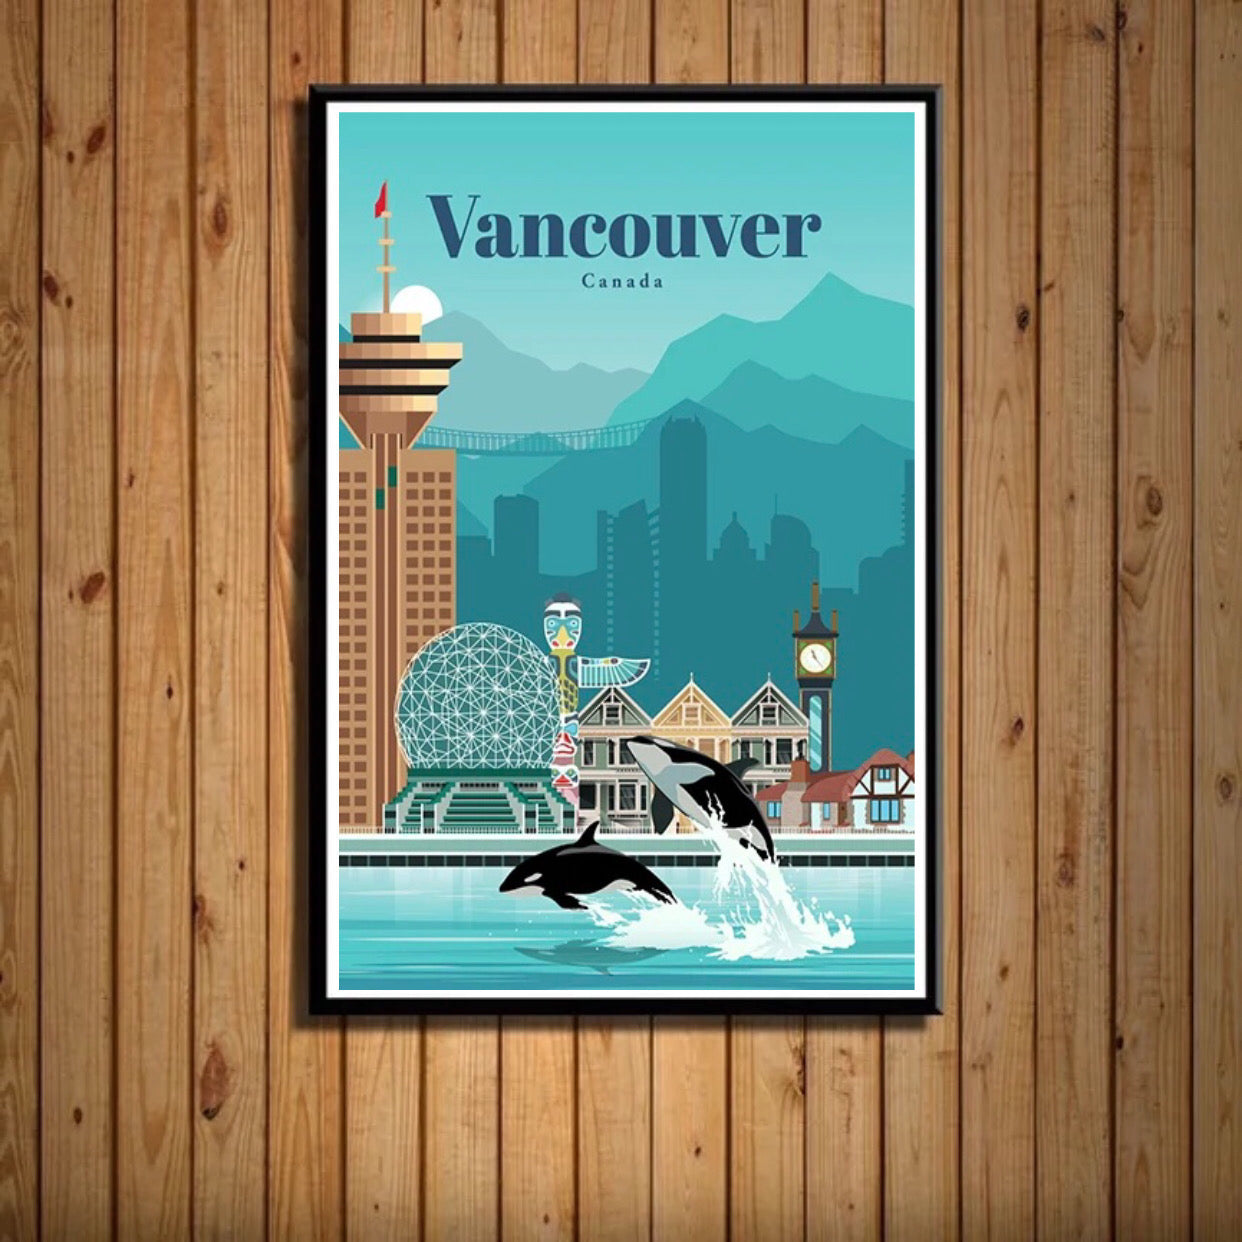 vancouver, canada travel poster